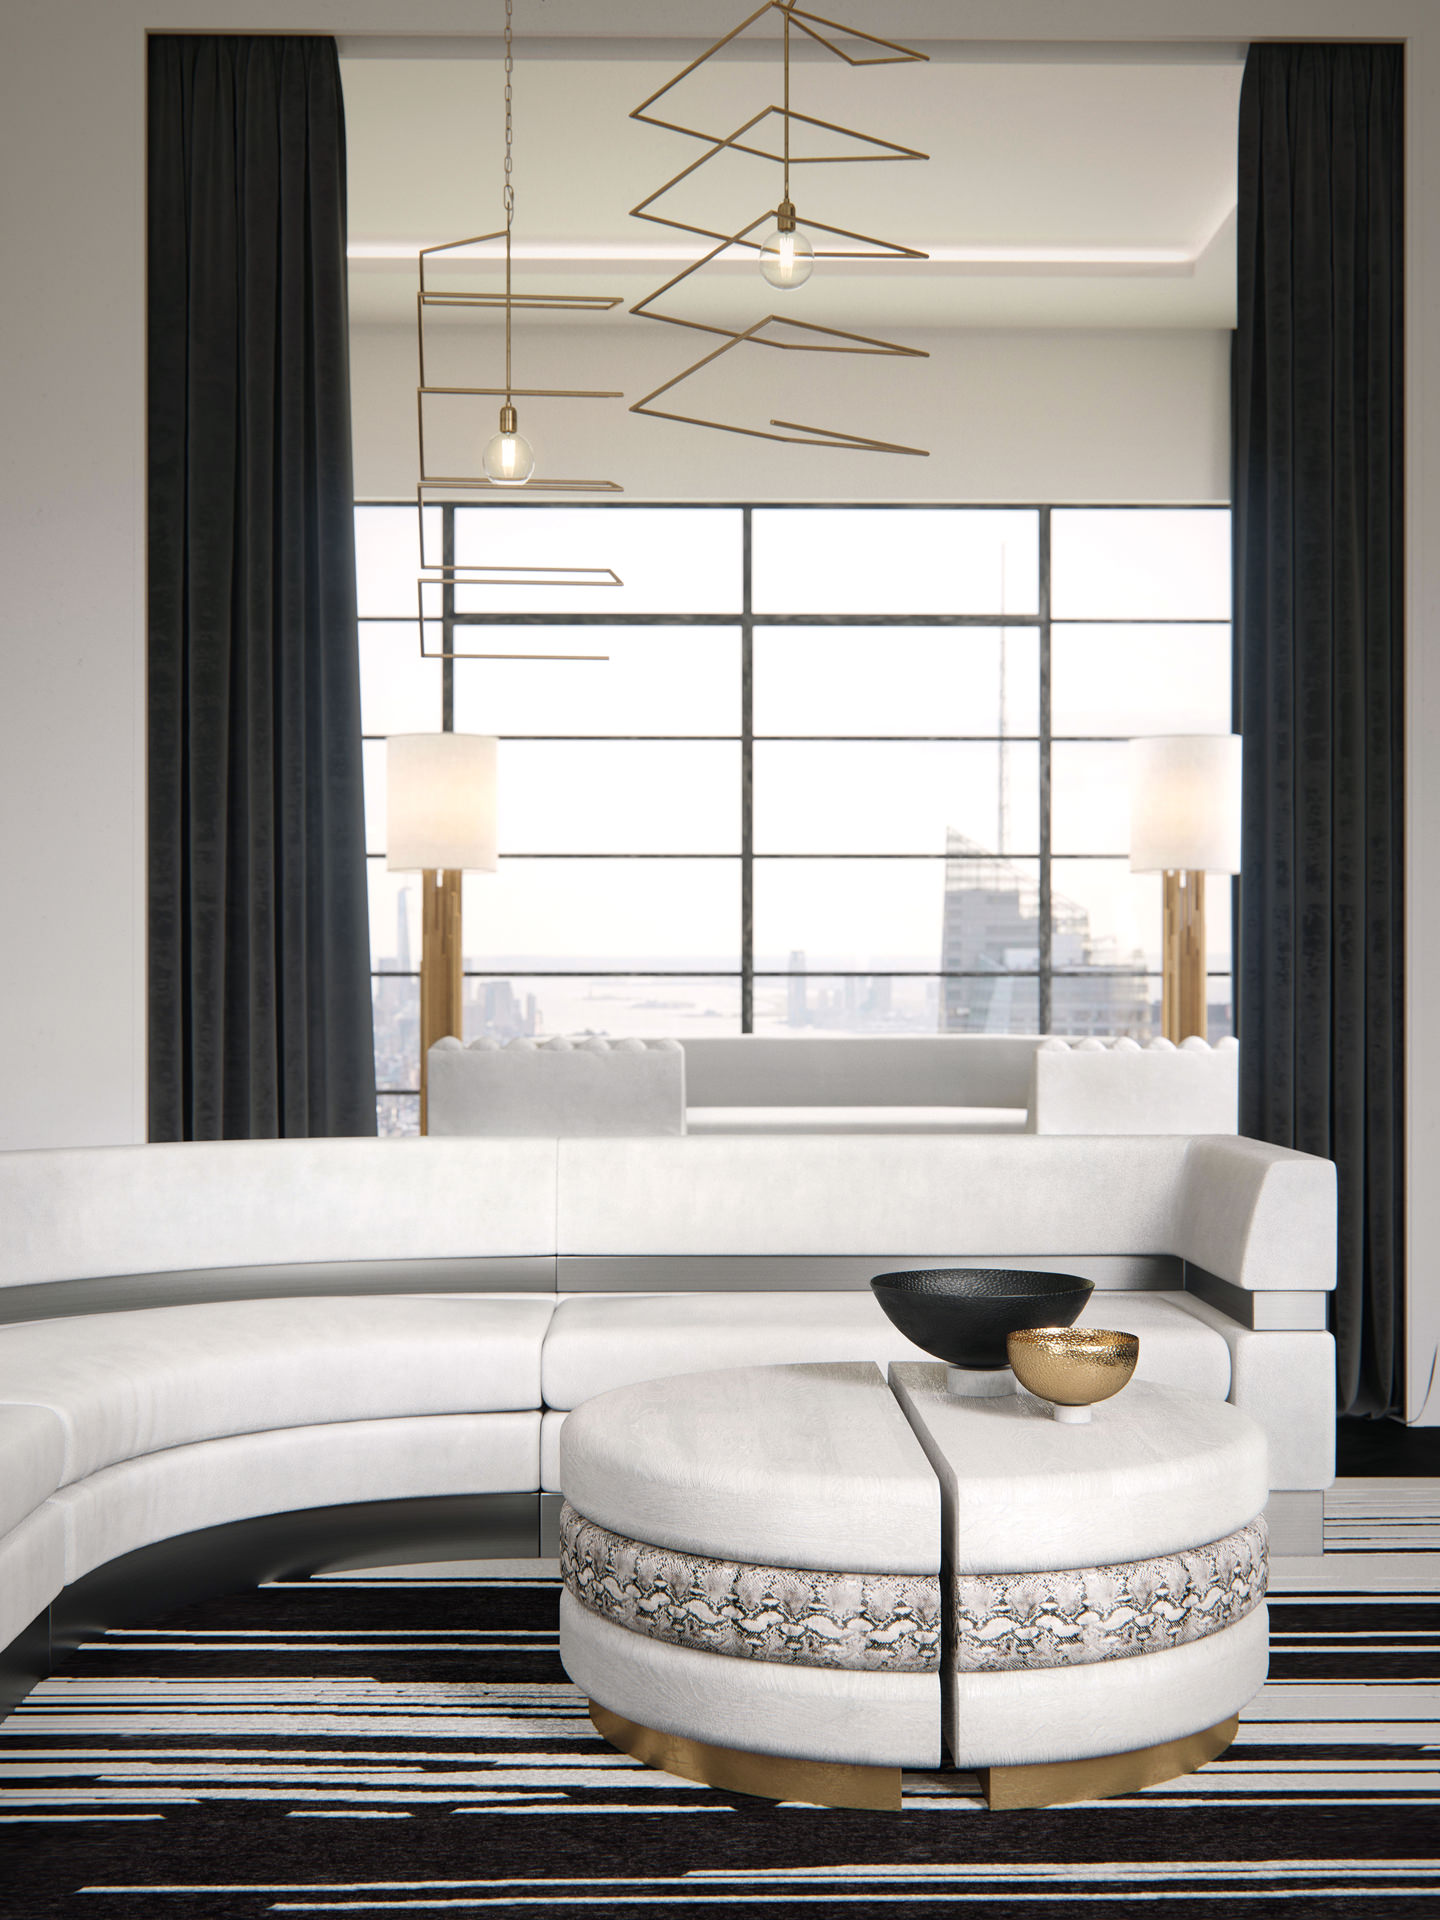 Closeup 3D furniture visualization of a modern white leather sofa and a three-layered leather designer table with two vases on it